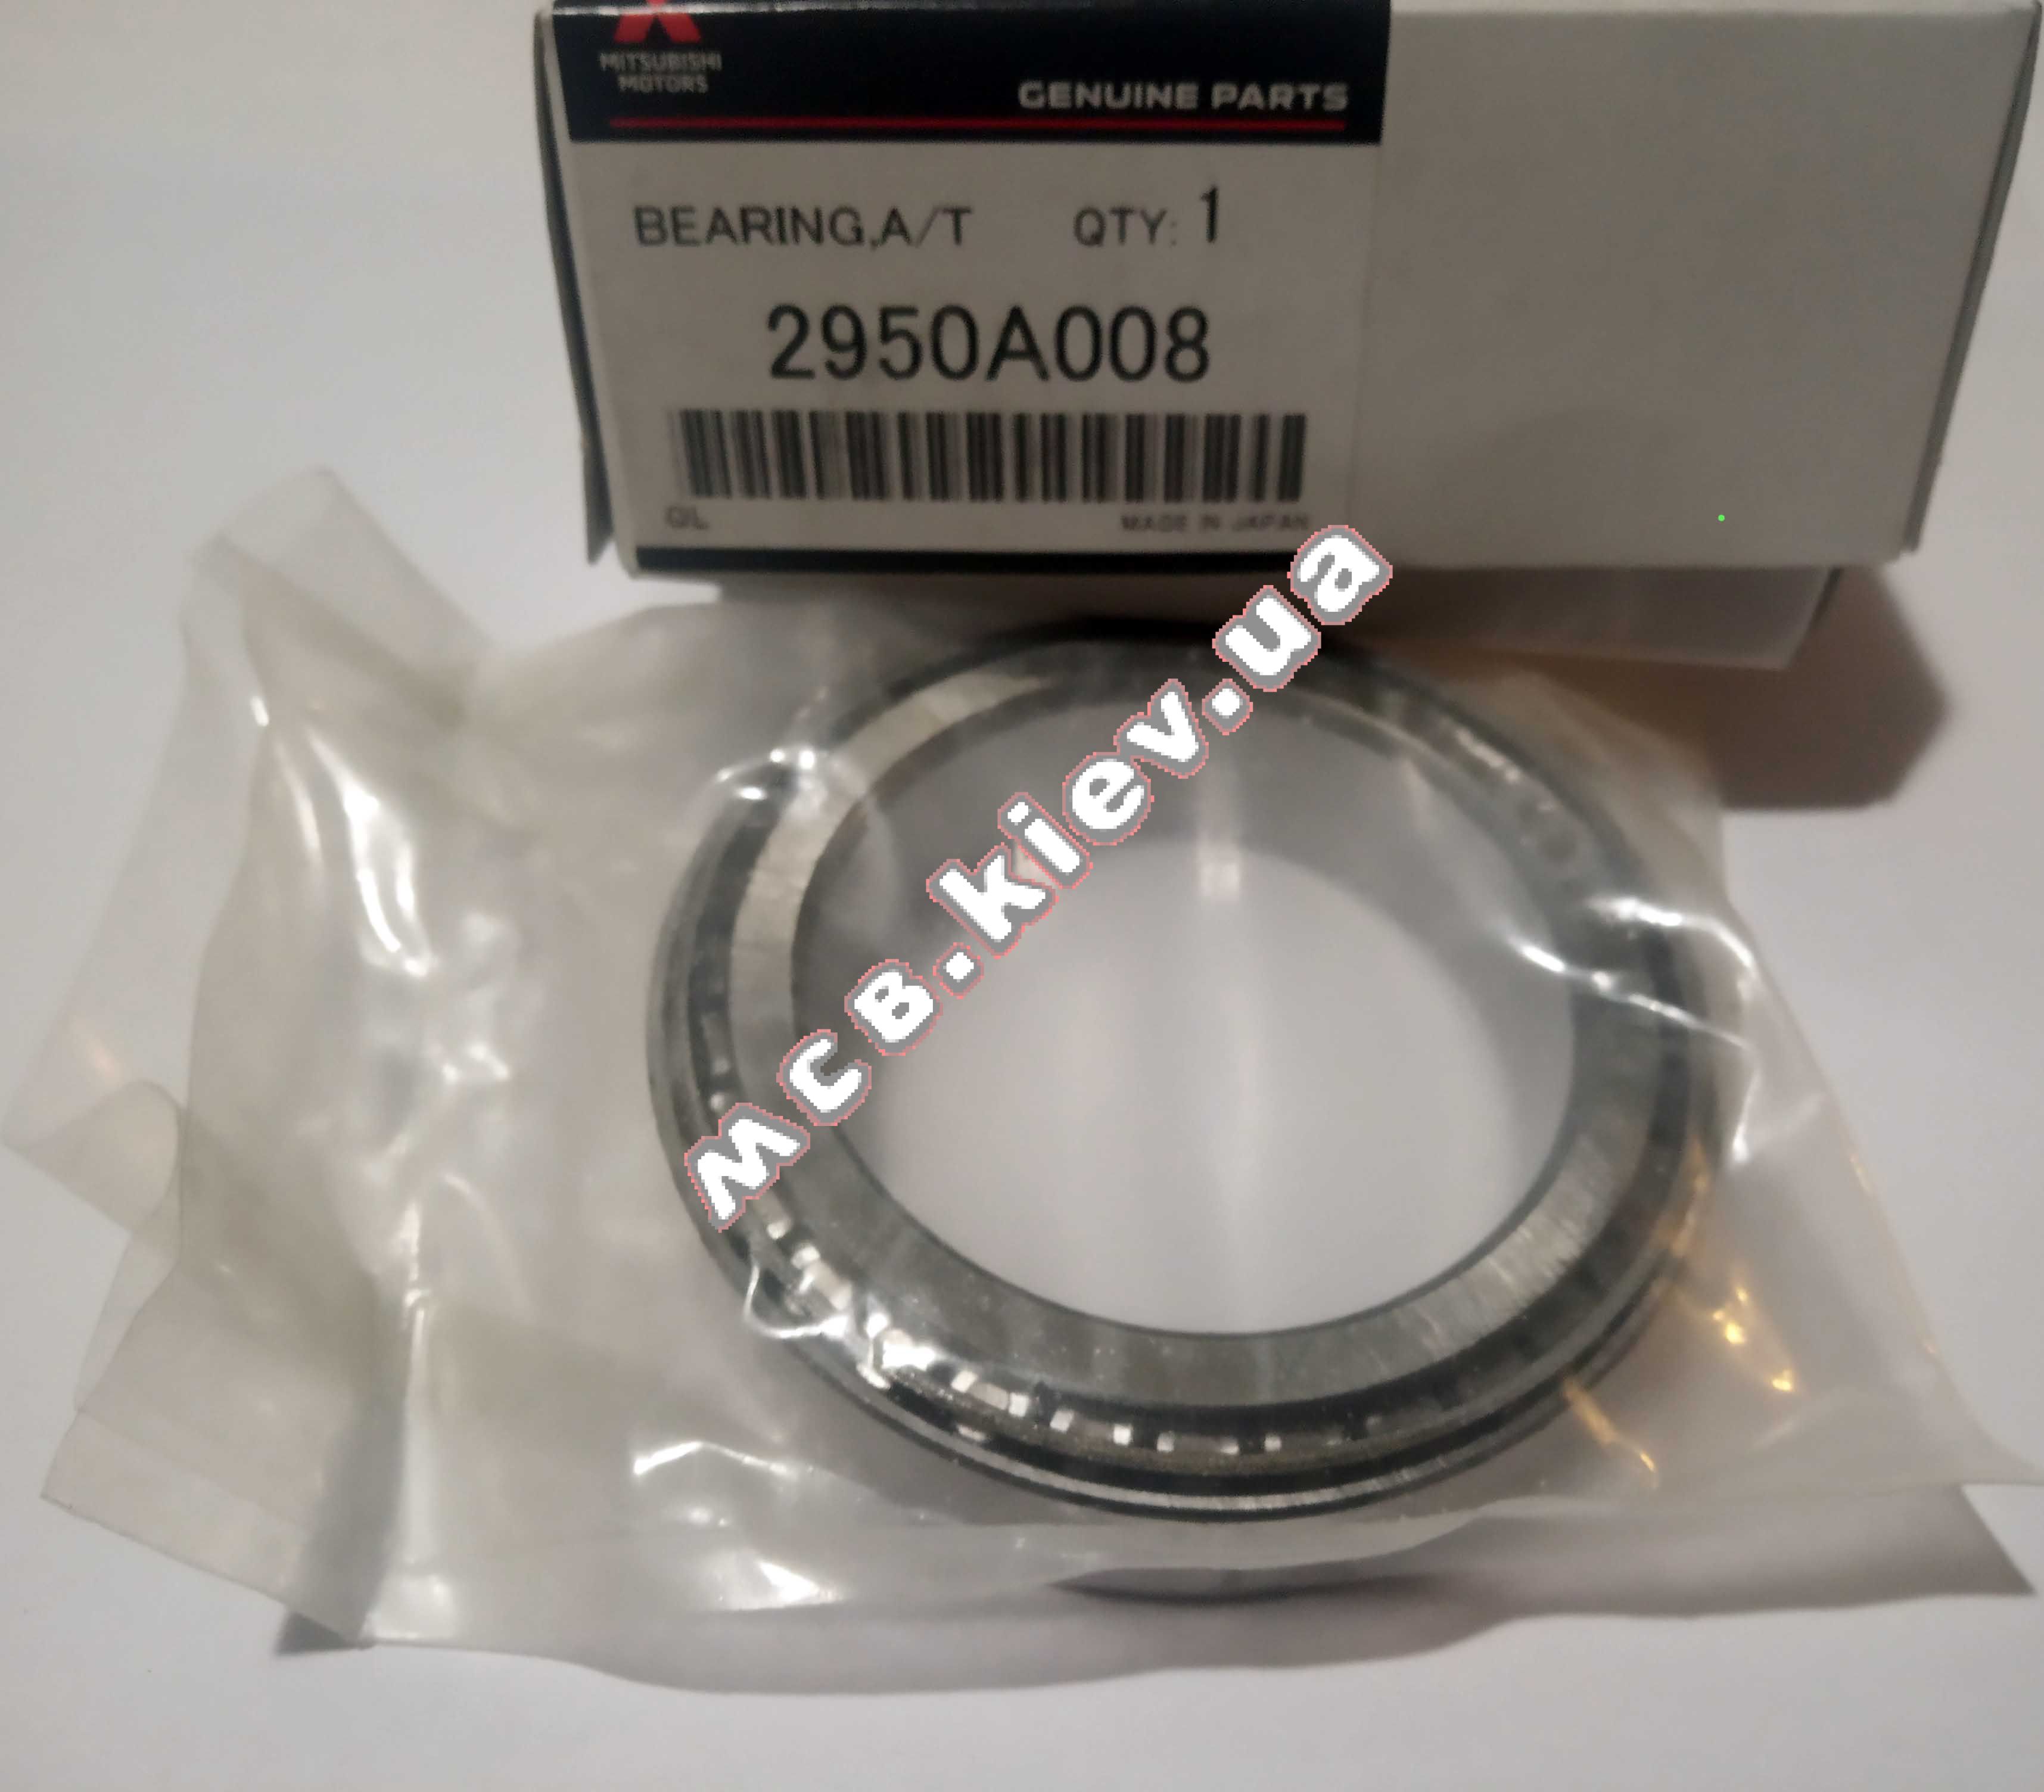   MITSUBISHI 2950A008      (21x60x85) Bearing W/Races, RE0F10A 4WD  CAST NSK  (R60-32AAG /R60-32AAG)